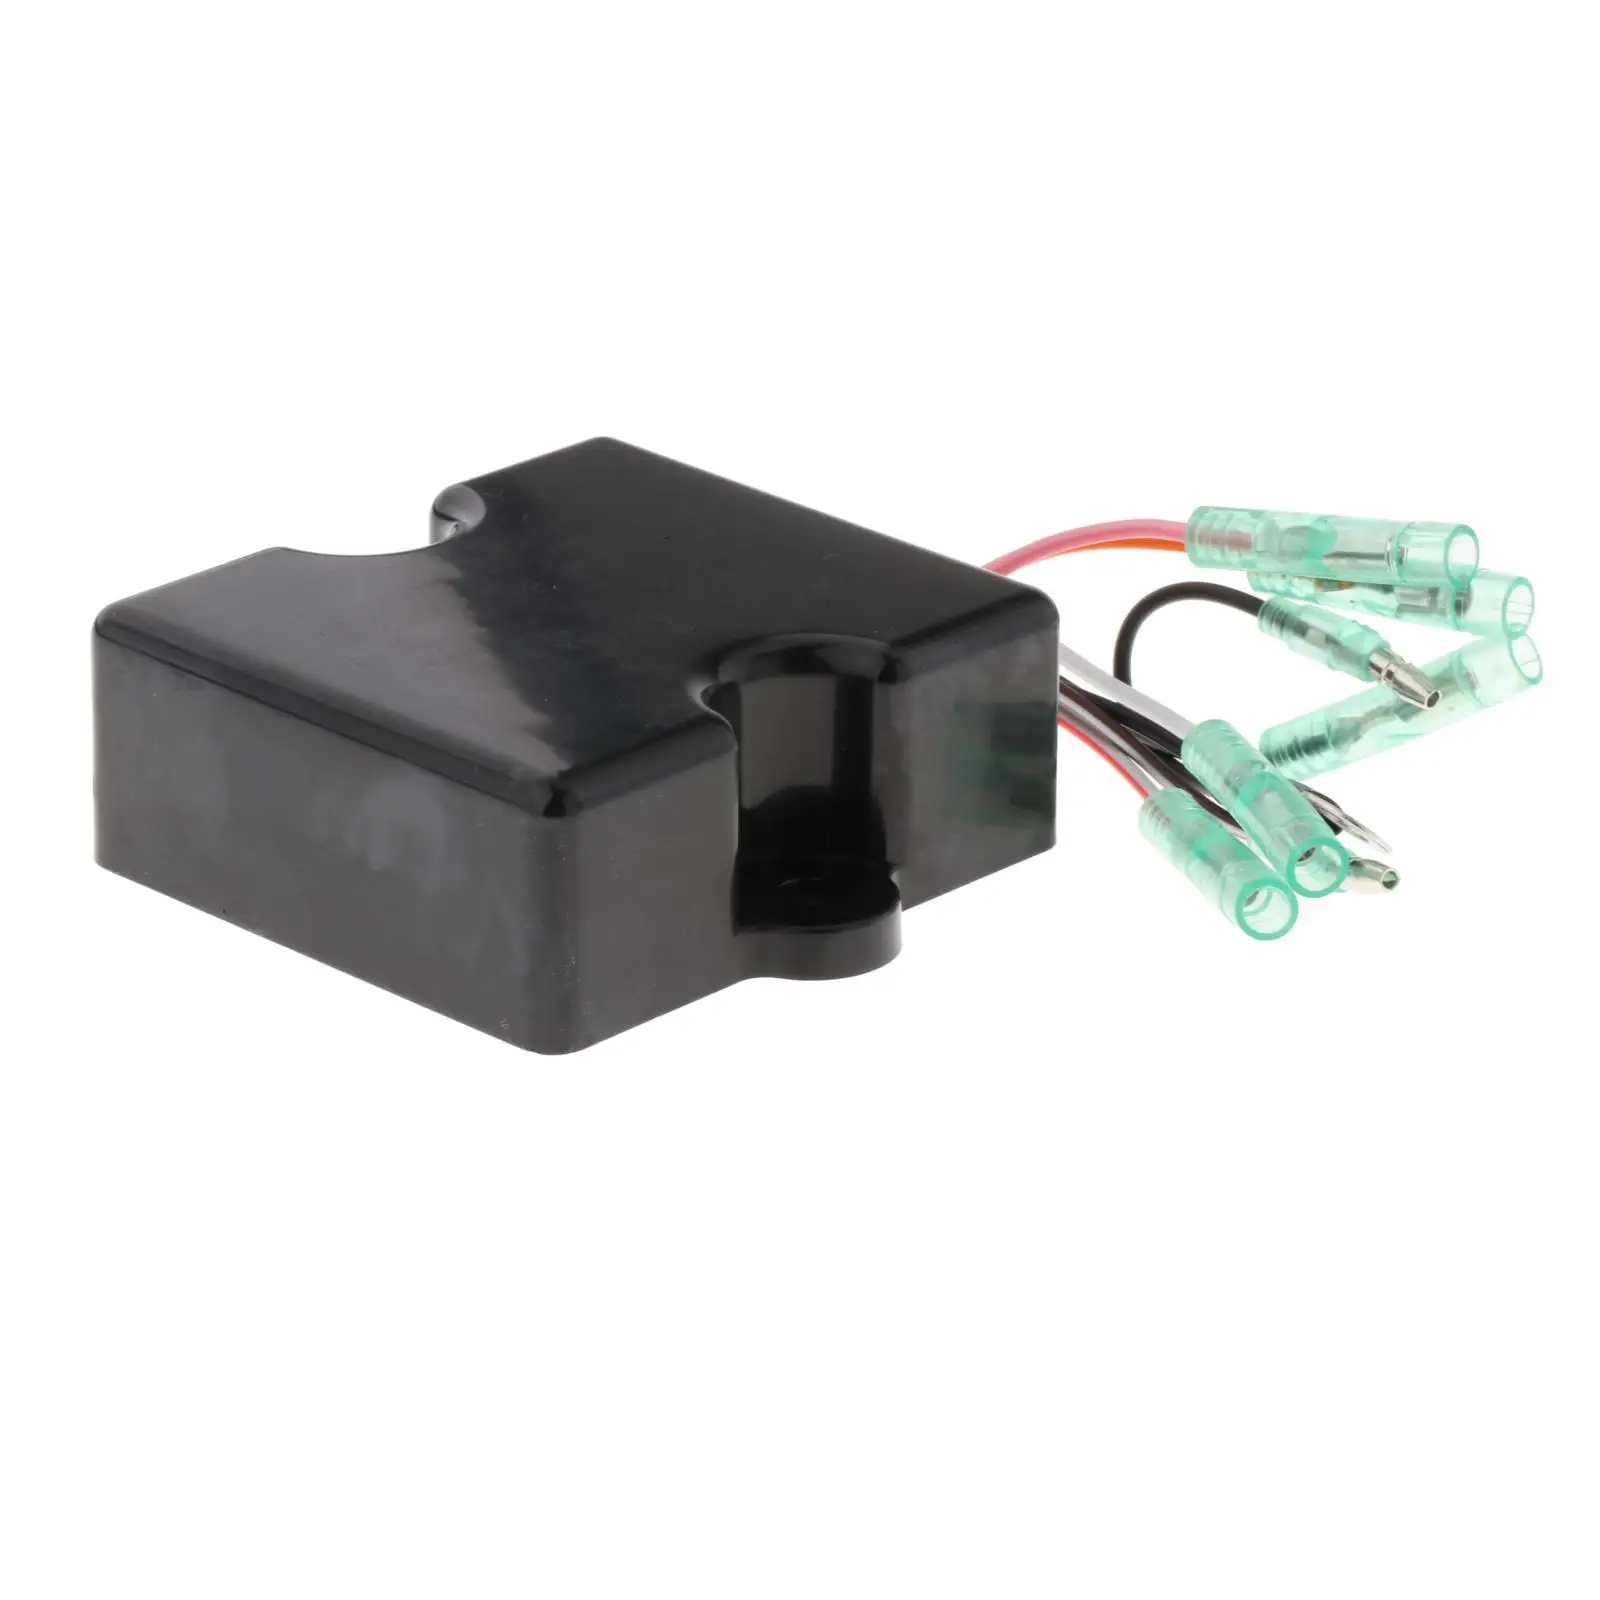 Cdi Unit Replaces 62T-85540-00 62T-85540-01 for Yamaha Superjet Wave Blaster Wave Wave Runner 3 650/700 XL700